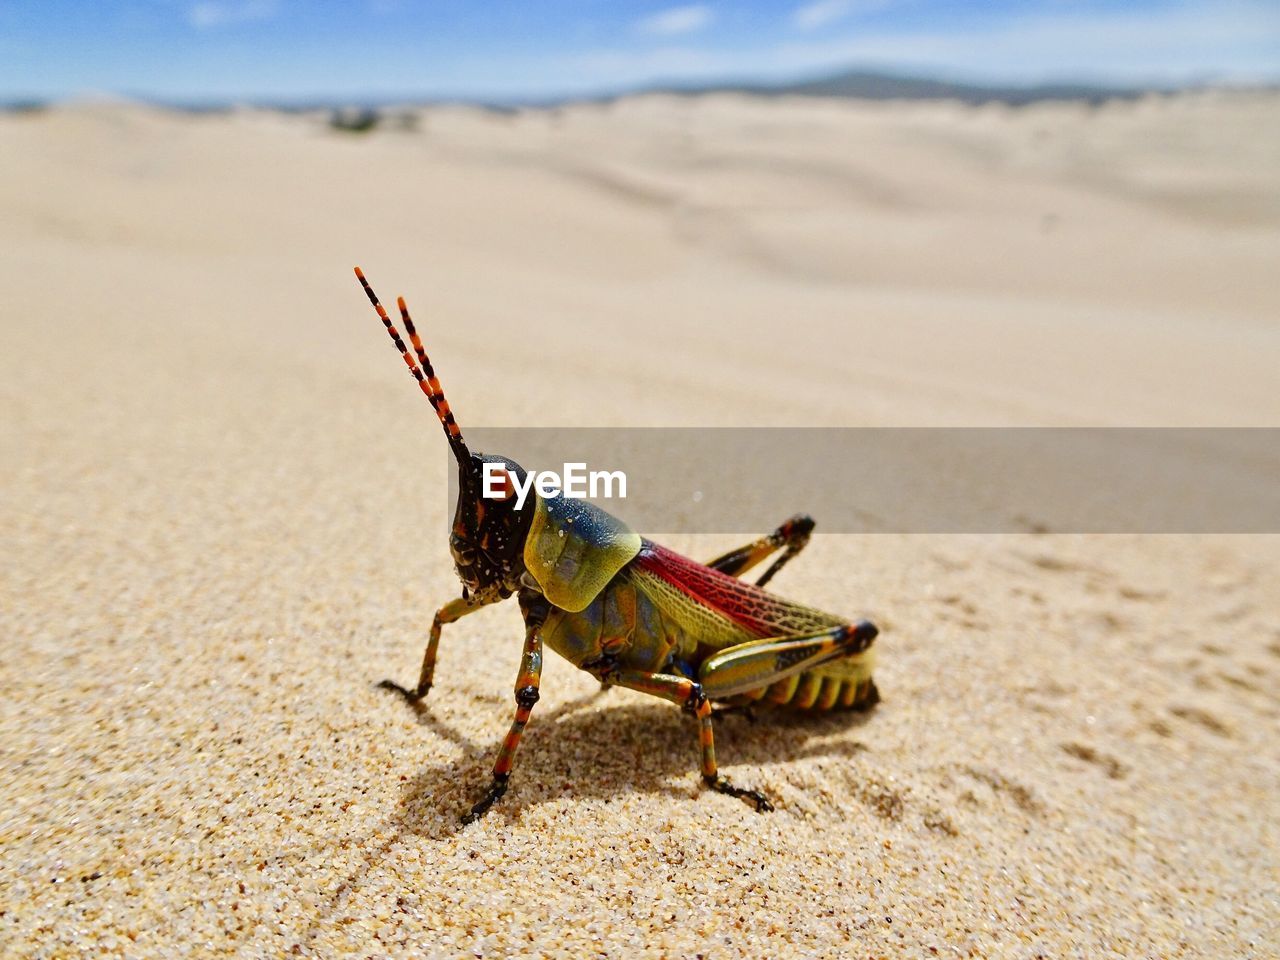 CLOSE-UP OF GRASSHOPPER ON SAND AT BEACH